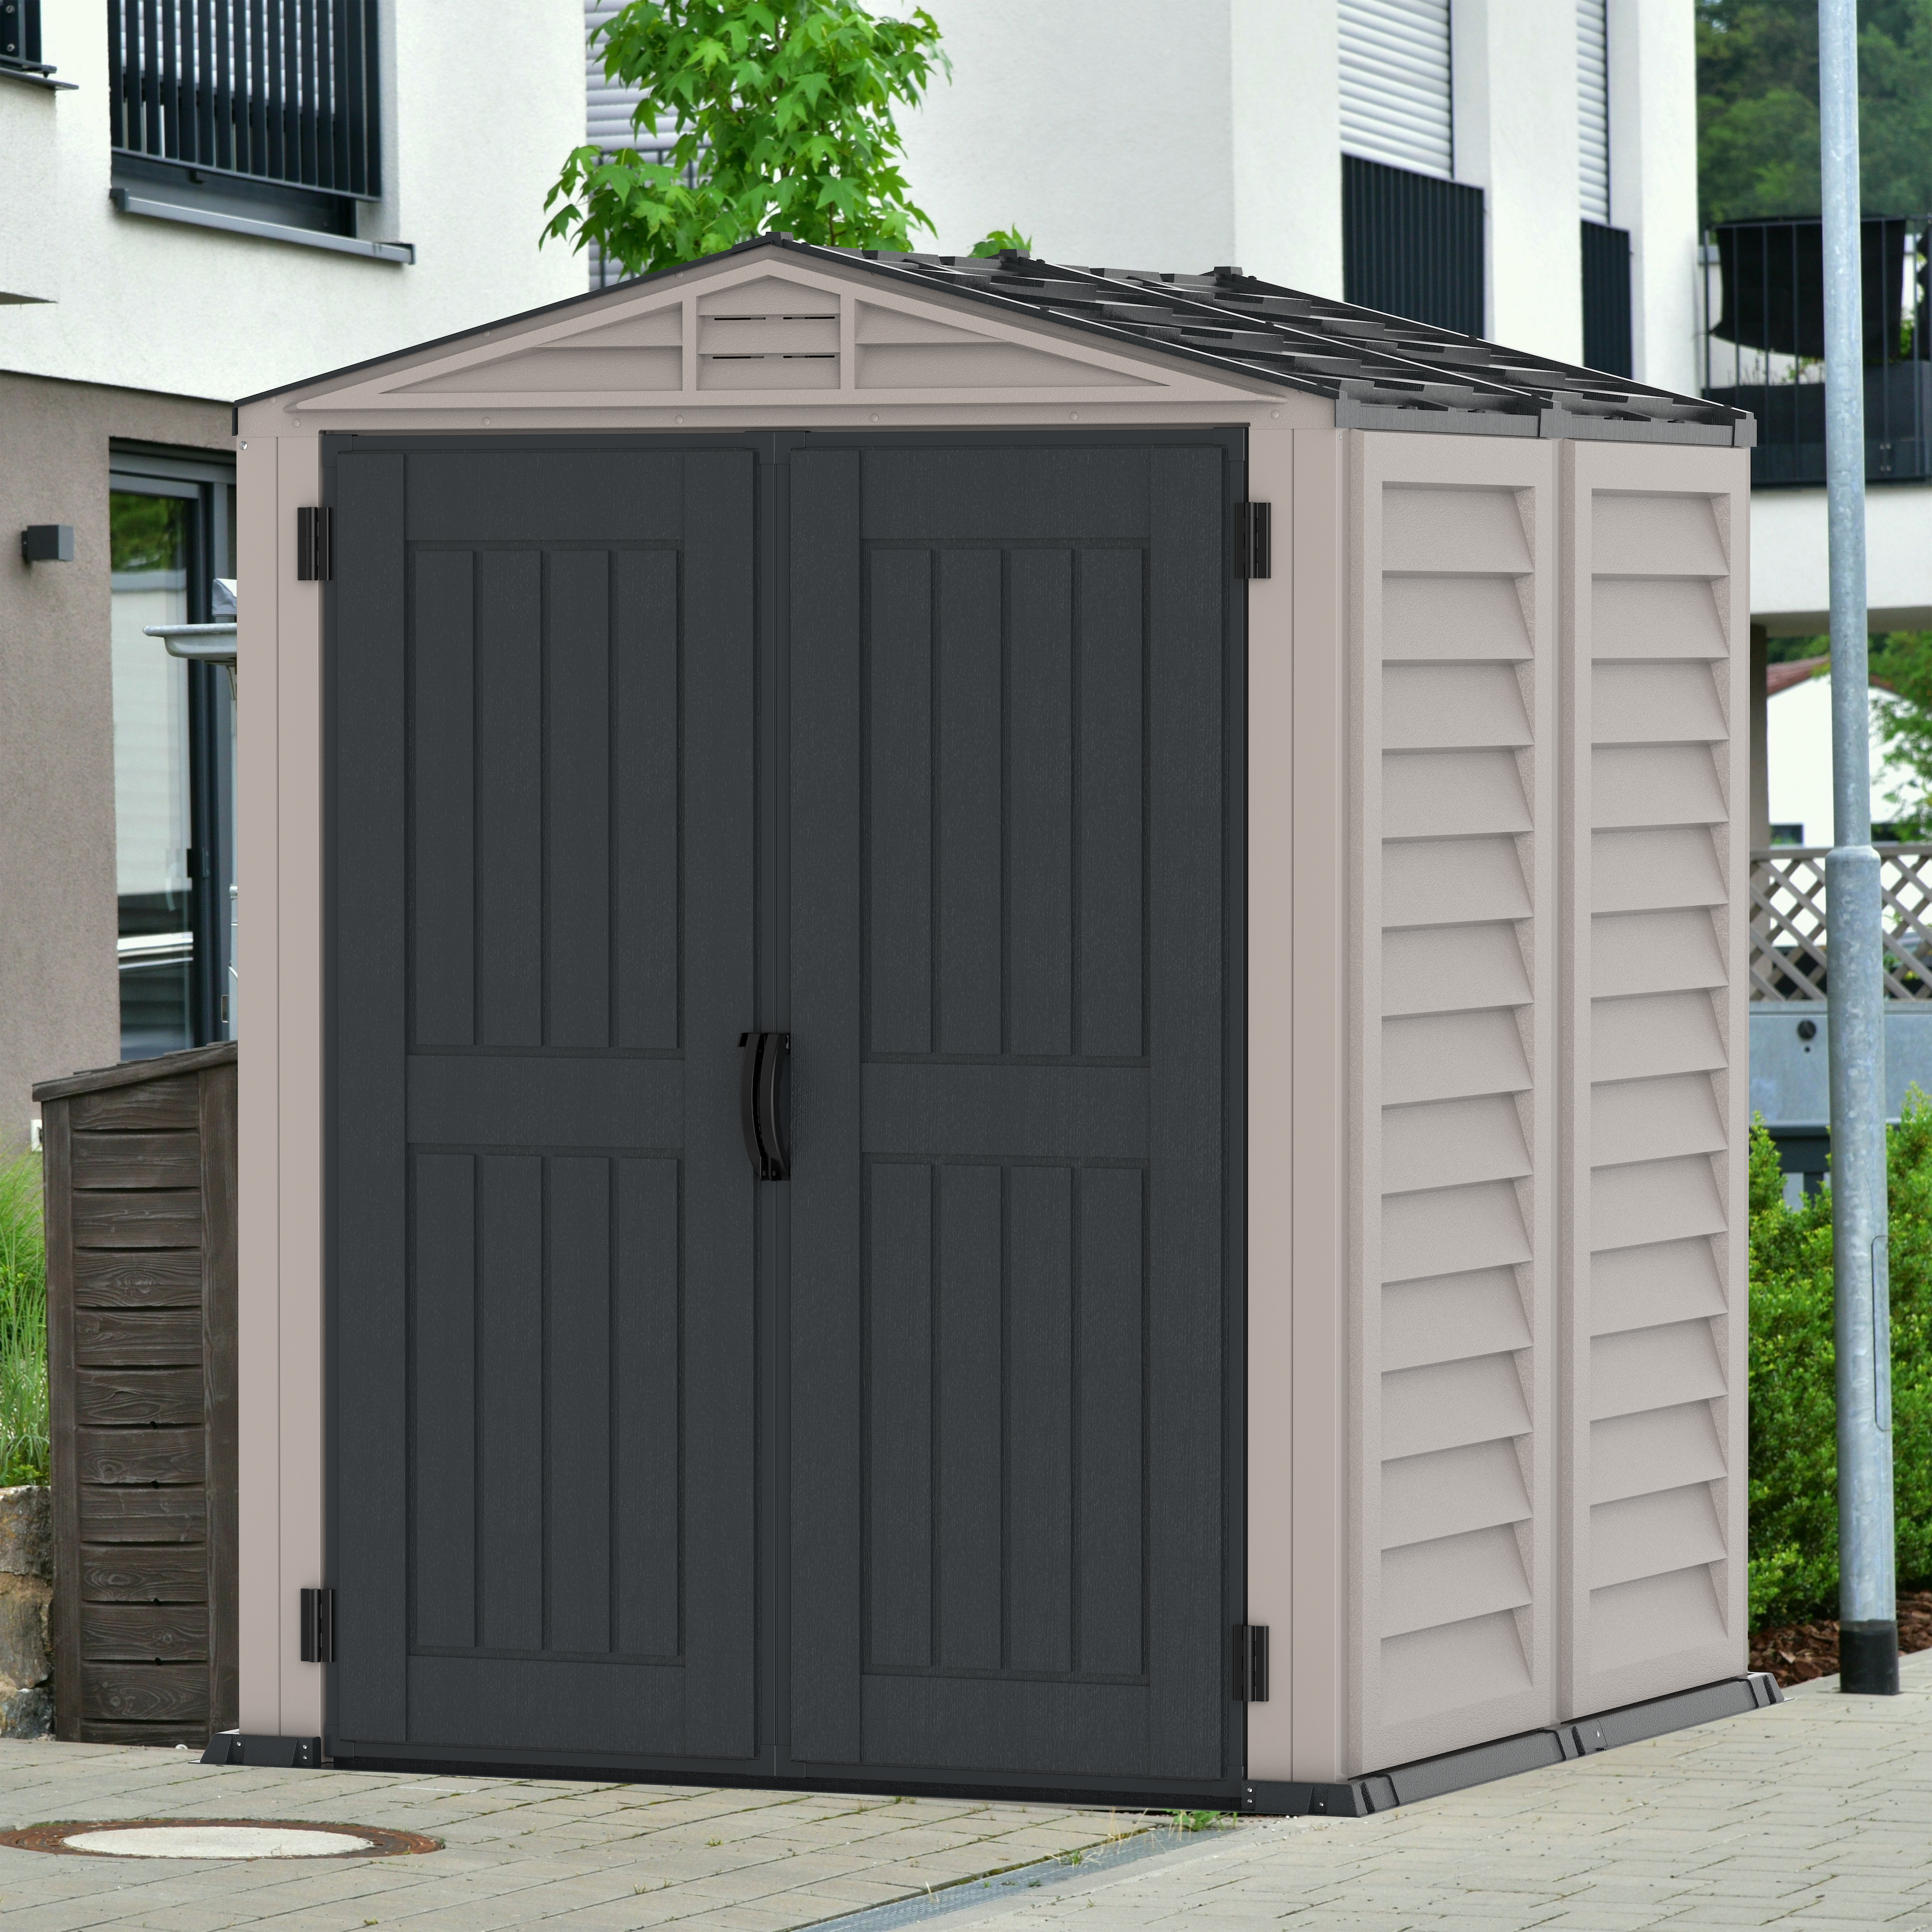 Duramax Vinyl Sheds Duramax YardMate Plus 5 ft. 6 in. x 5ft. 6 in. Gray Vinyl Storage Shed with Molded Floor